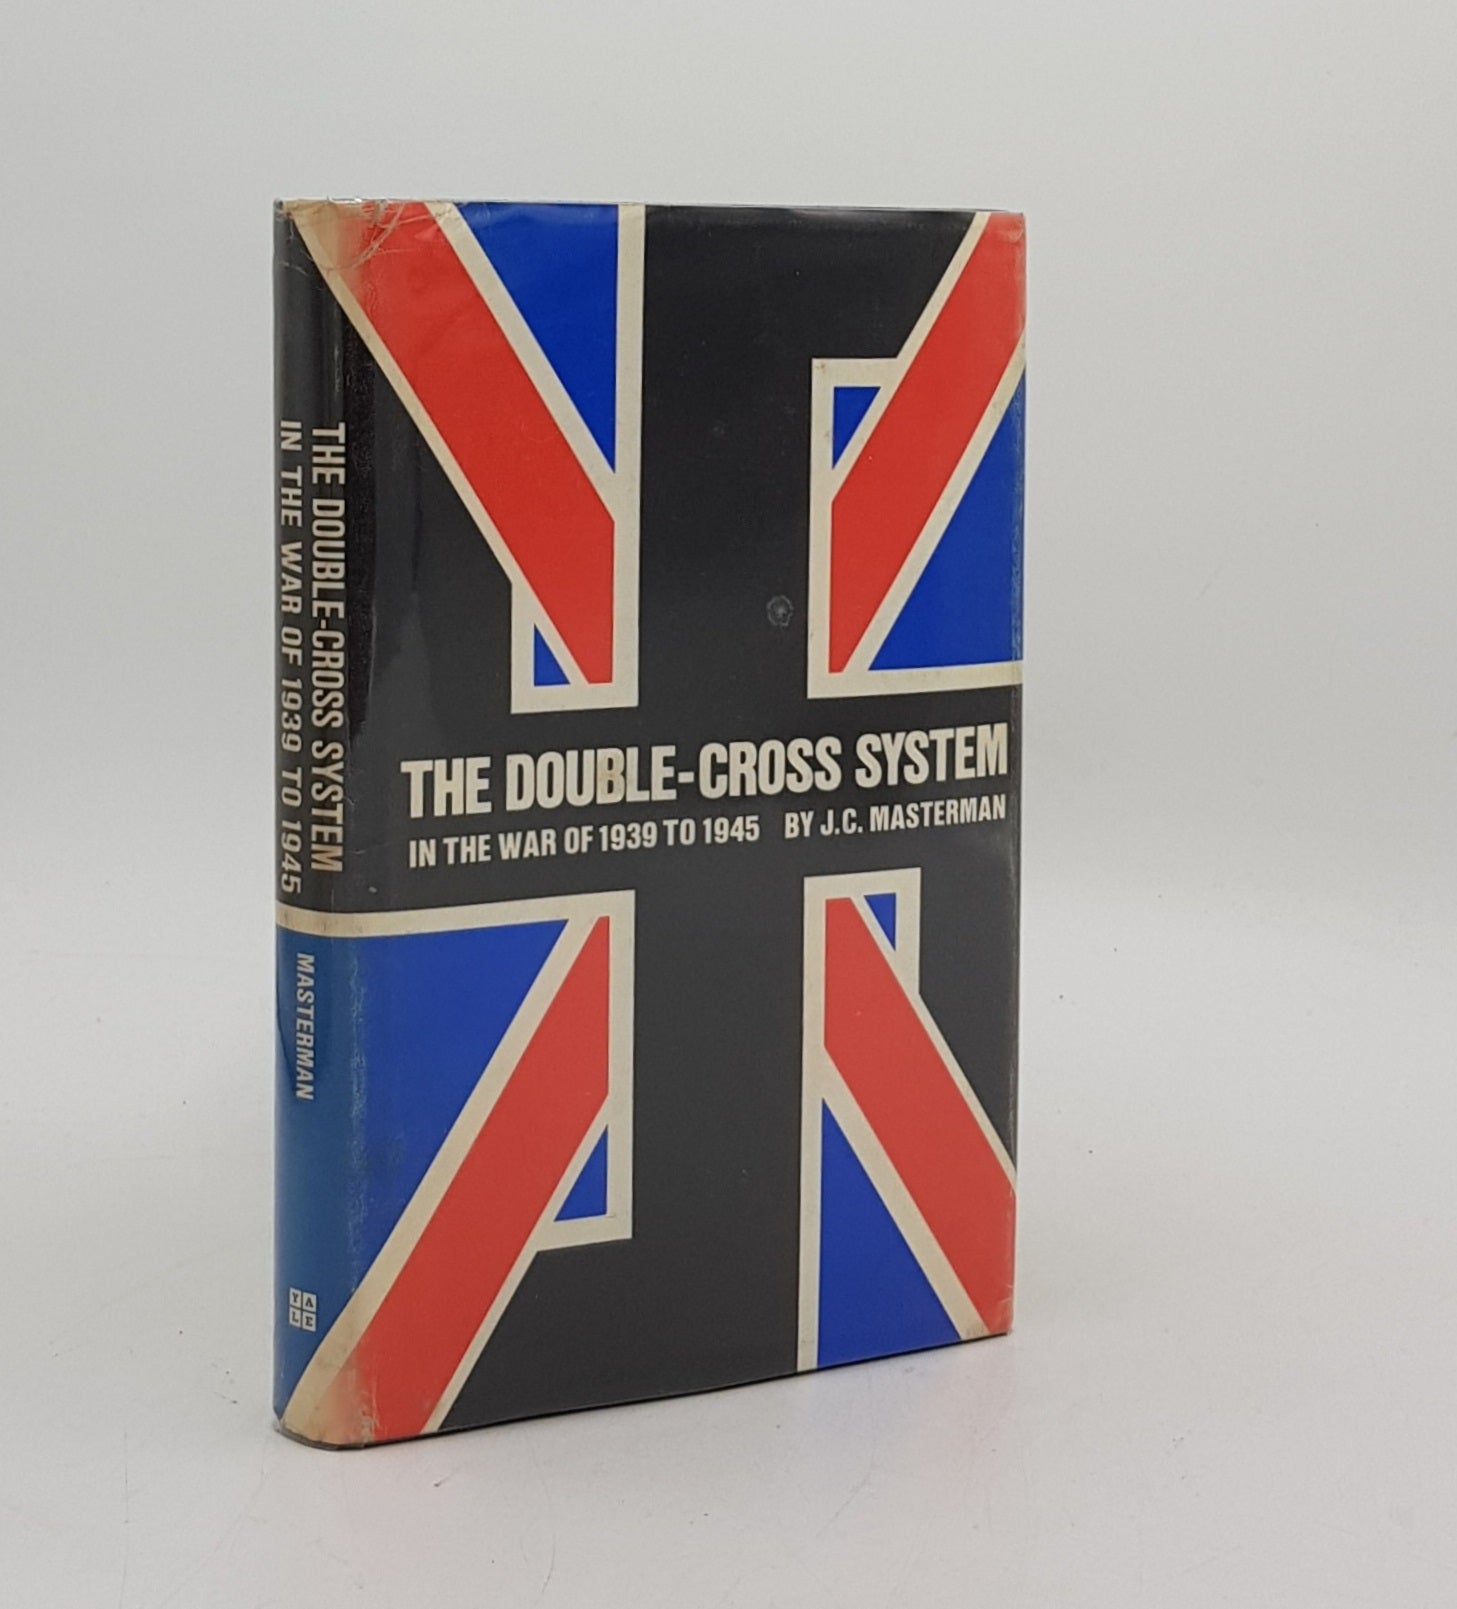 MASTERMAN J.C. - The Double-Cross System in the War of 1939 to 1945